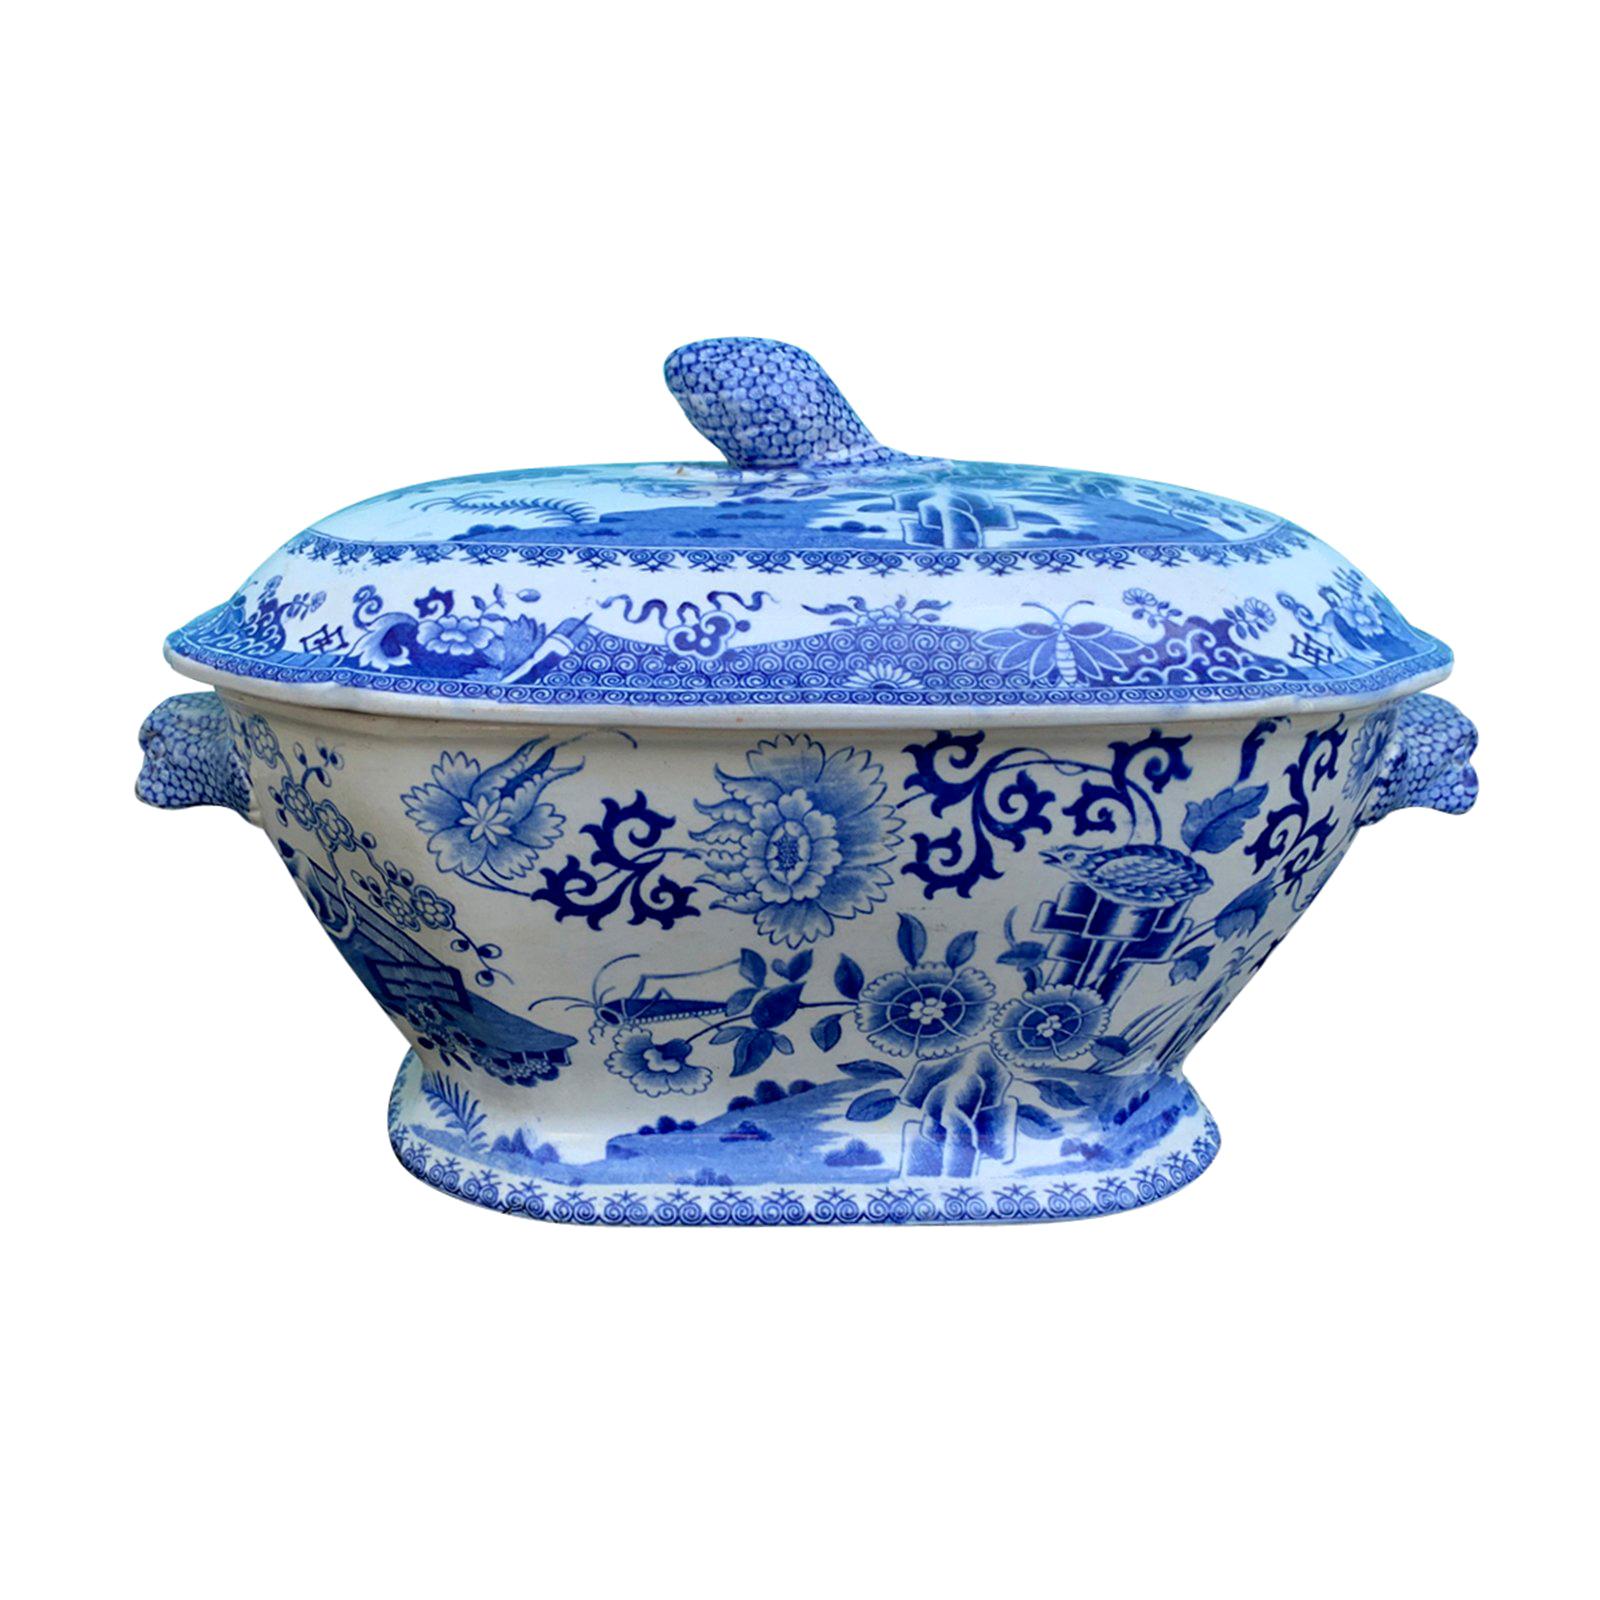 Early 19th Century Spode Blue and White Tureen